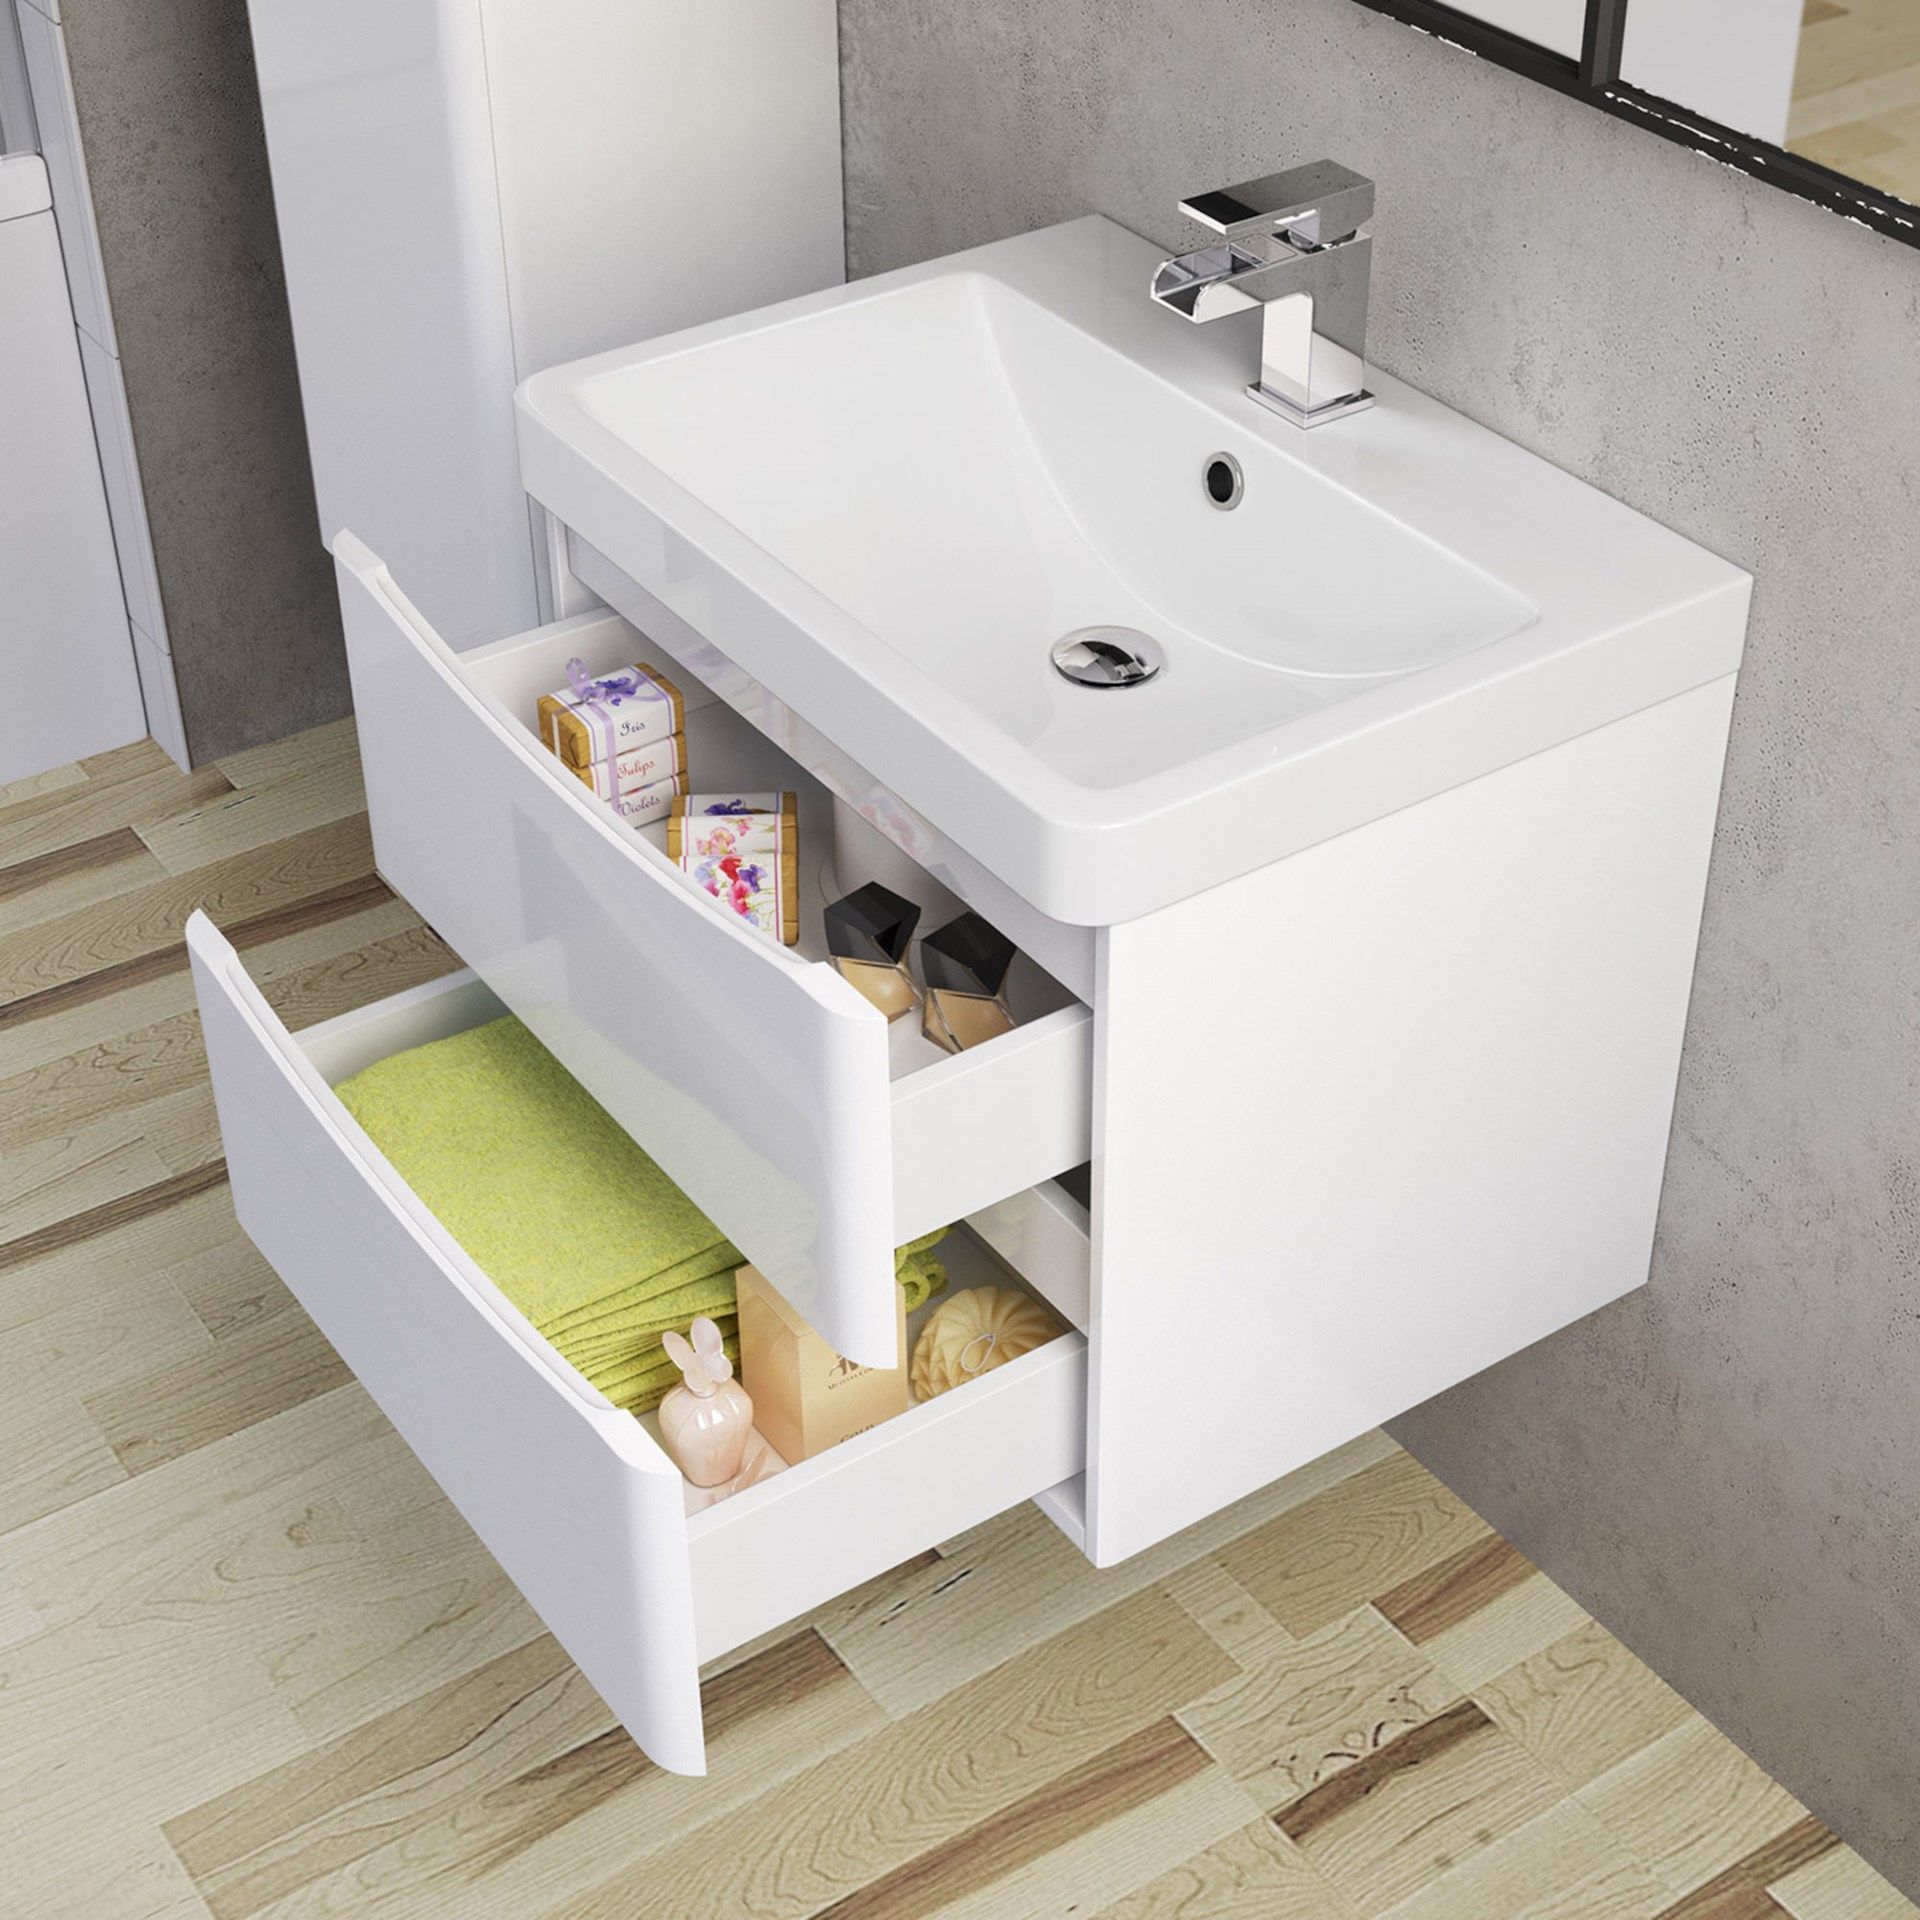 BRAND NEW BOXED 600mm Austin II Gloss White Built In Basin Drawer Unit - Wall Hung.RRP £849.99... - Image 2 of 3